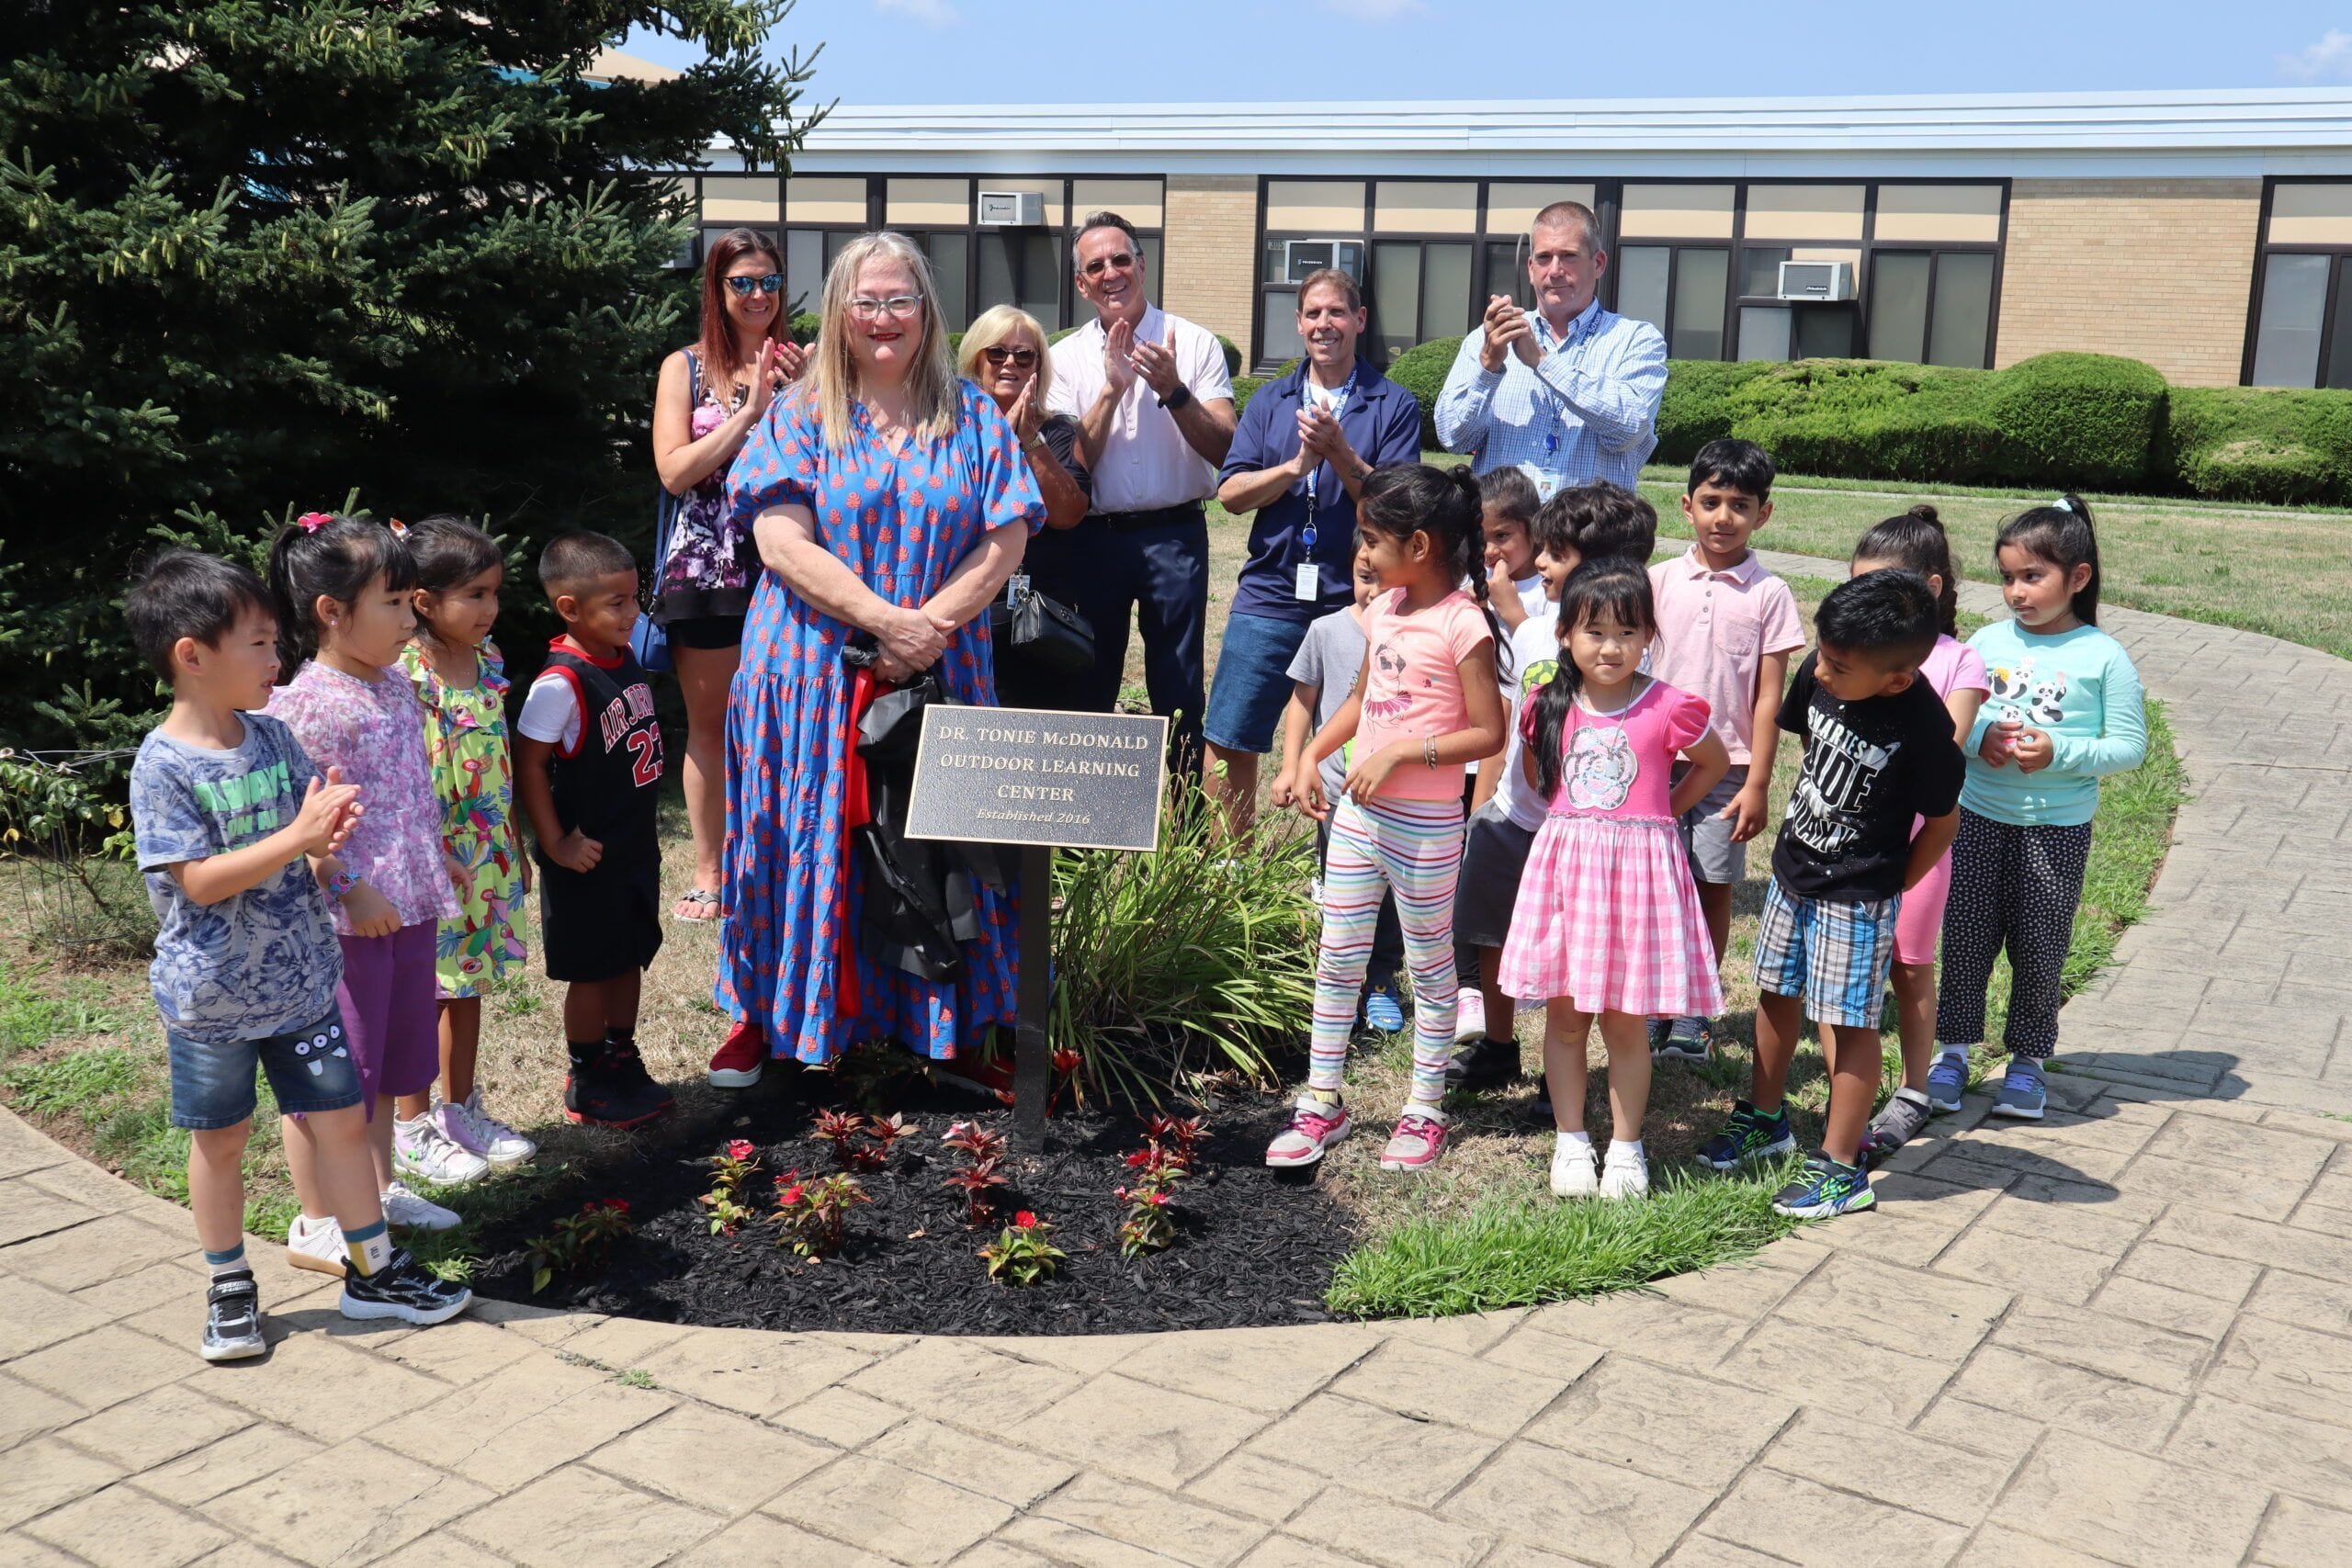 Levittown Outdoor Learning Center Dedicated To Dr. Tonie McDonald